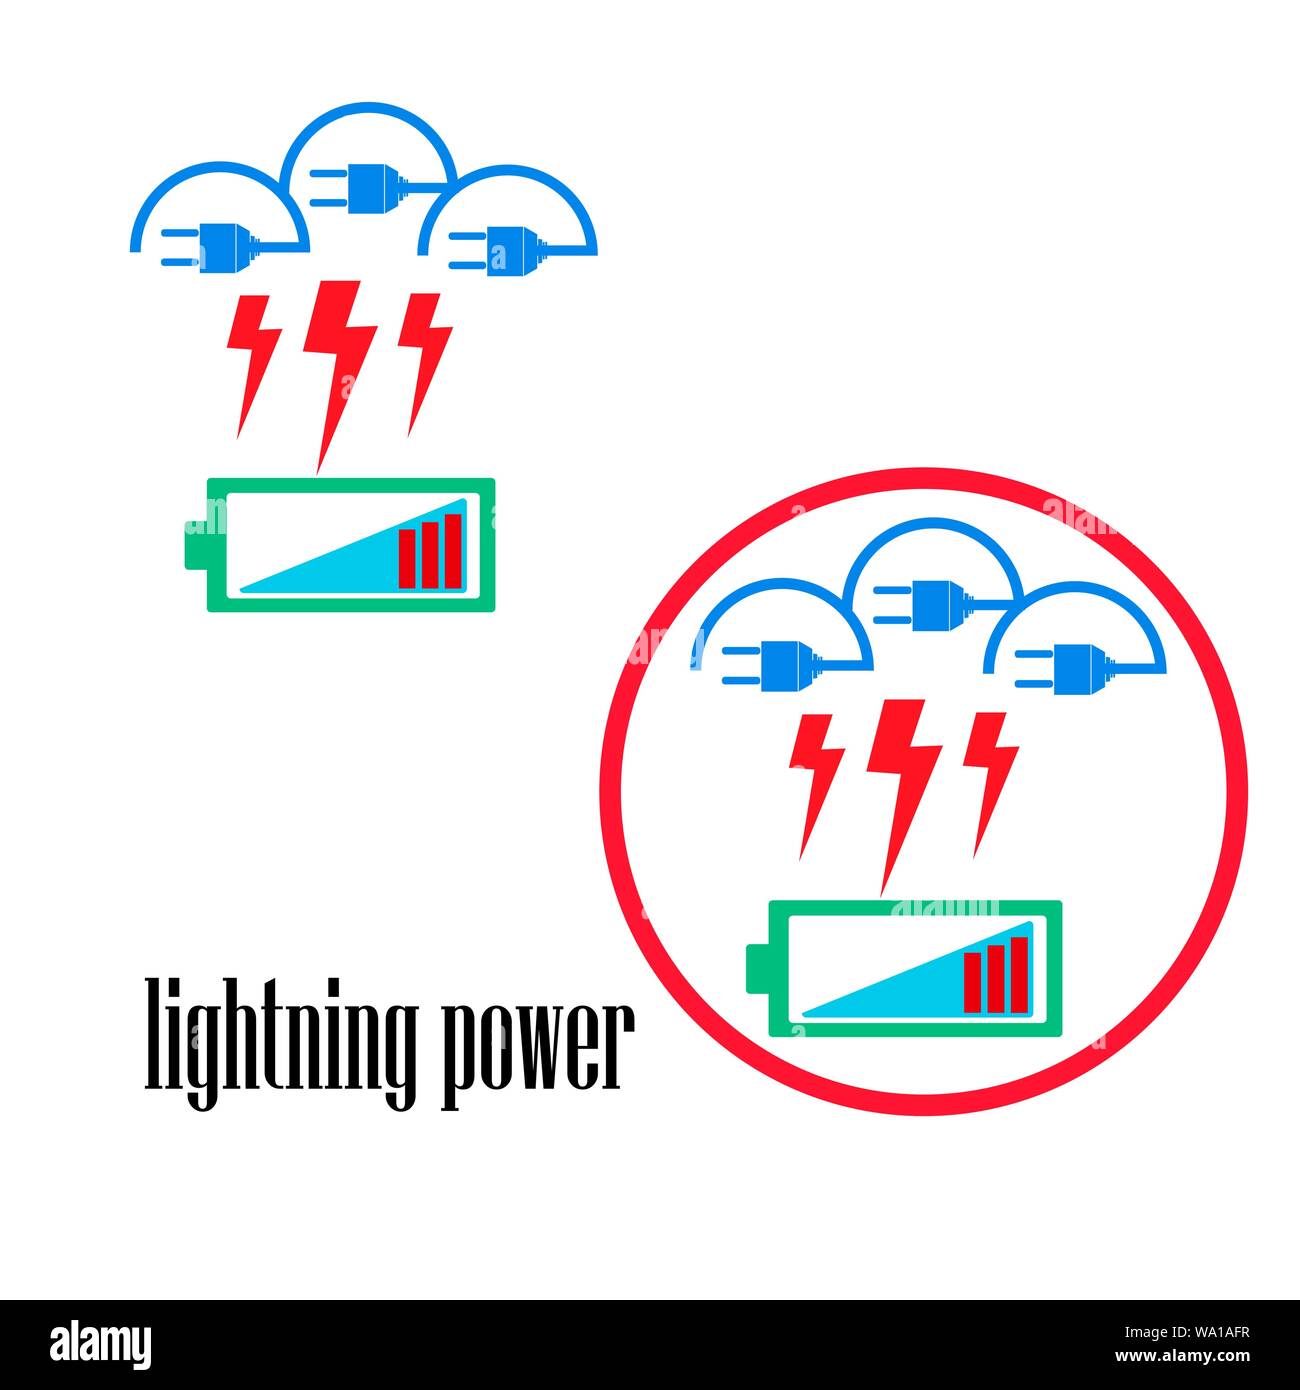 Light, electric, logo design elements. The concept of the symbol of energy and electric thunder. Lightning from clouds and batteries. Emblem vector em Stock Vector